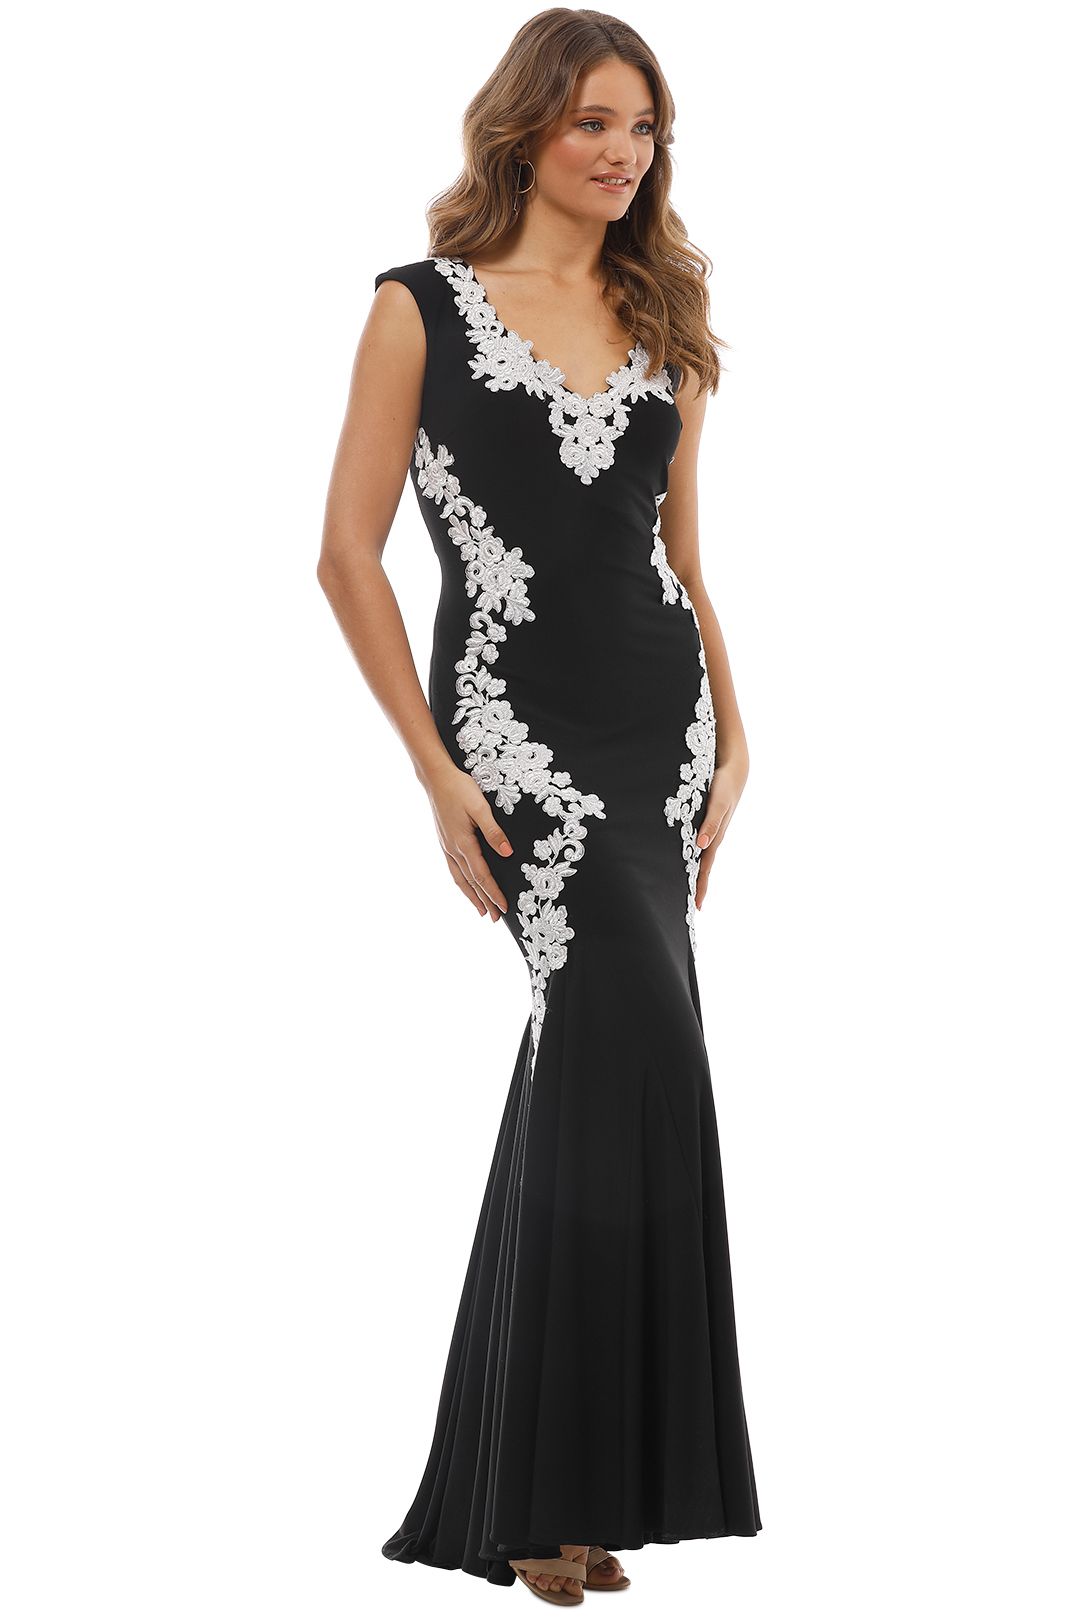 Montique - Ava Embroidered Gown - Black - Side